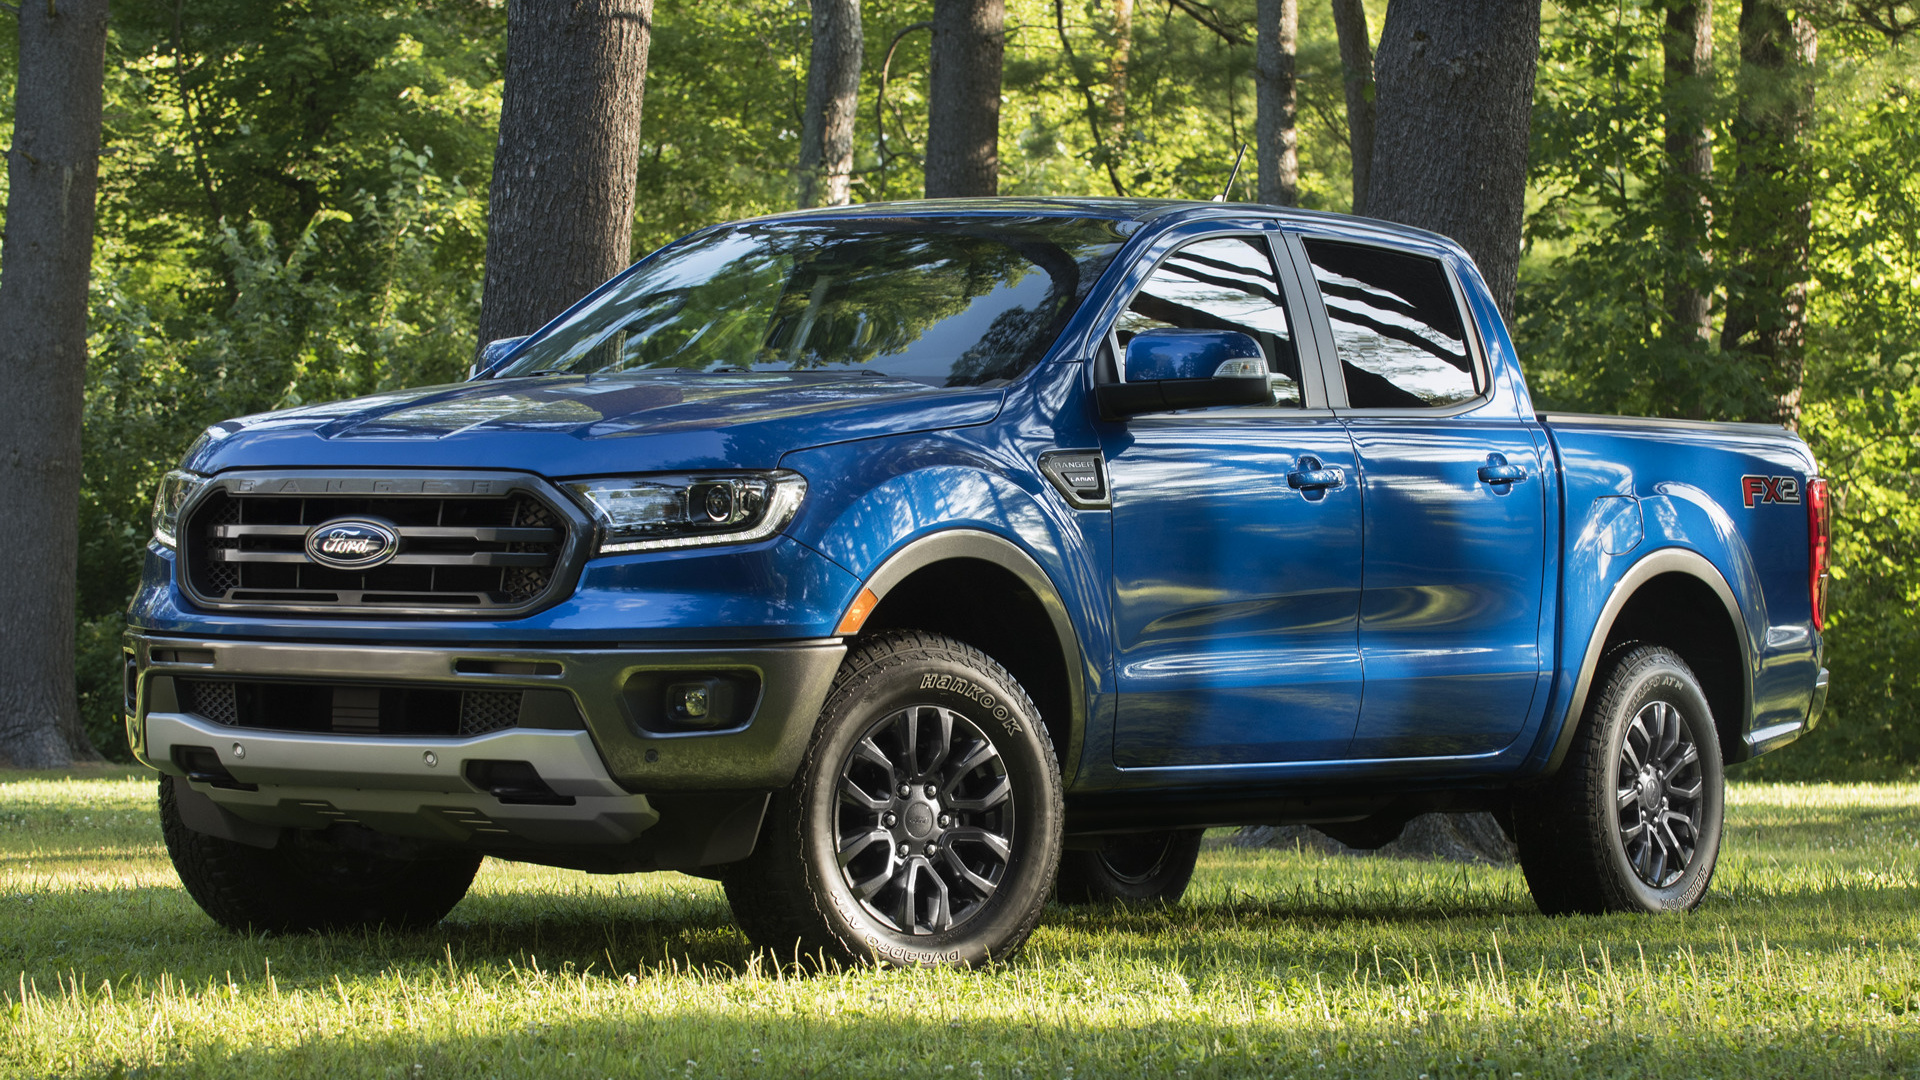 Ford Ranger: 2020 FX2 SuperCrew, A midsize pickup truck, Vehicle. 1920x1080 Full HD Background.